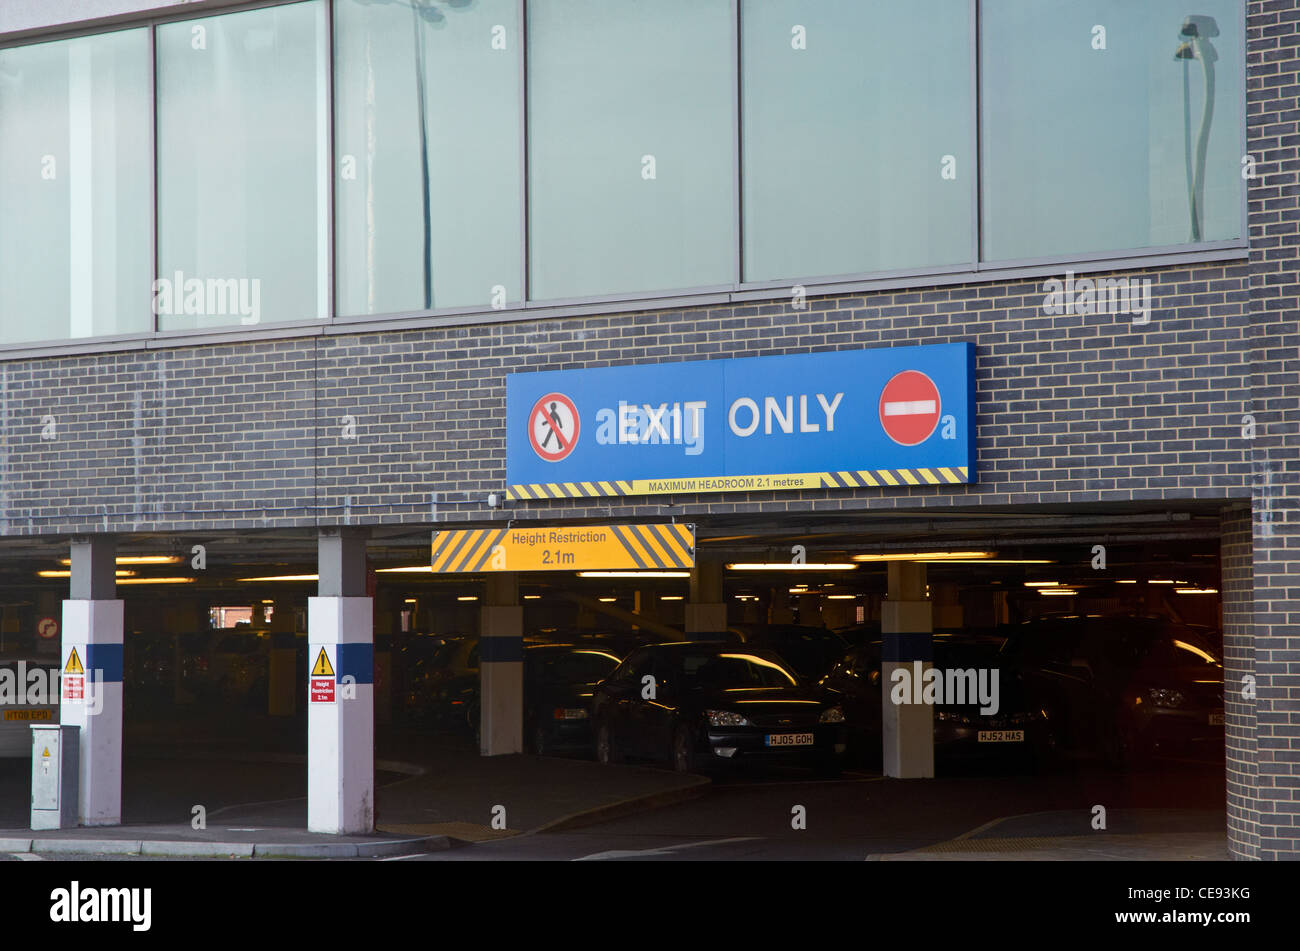 Exit only sign, multi-story car park Stock Photo